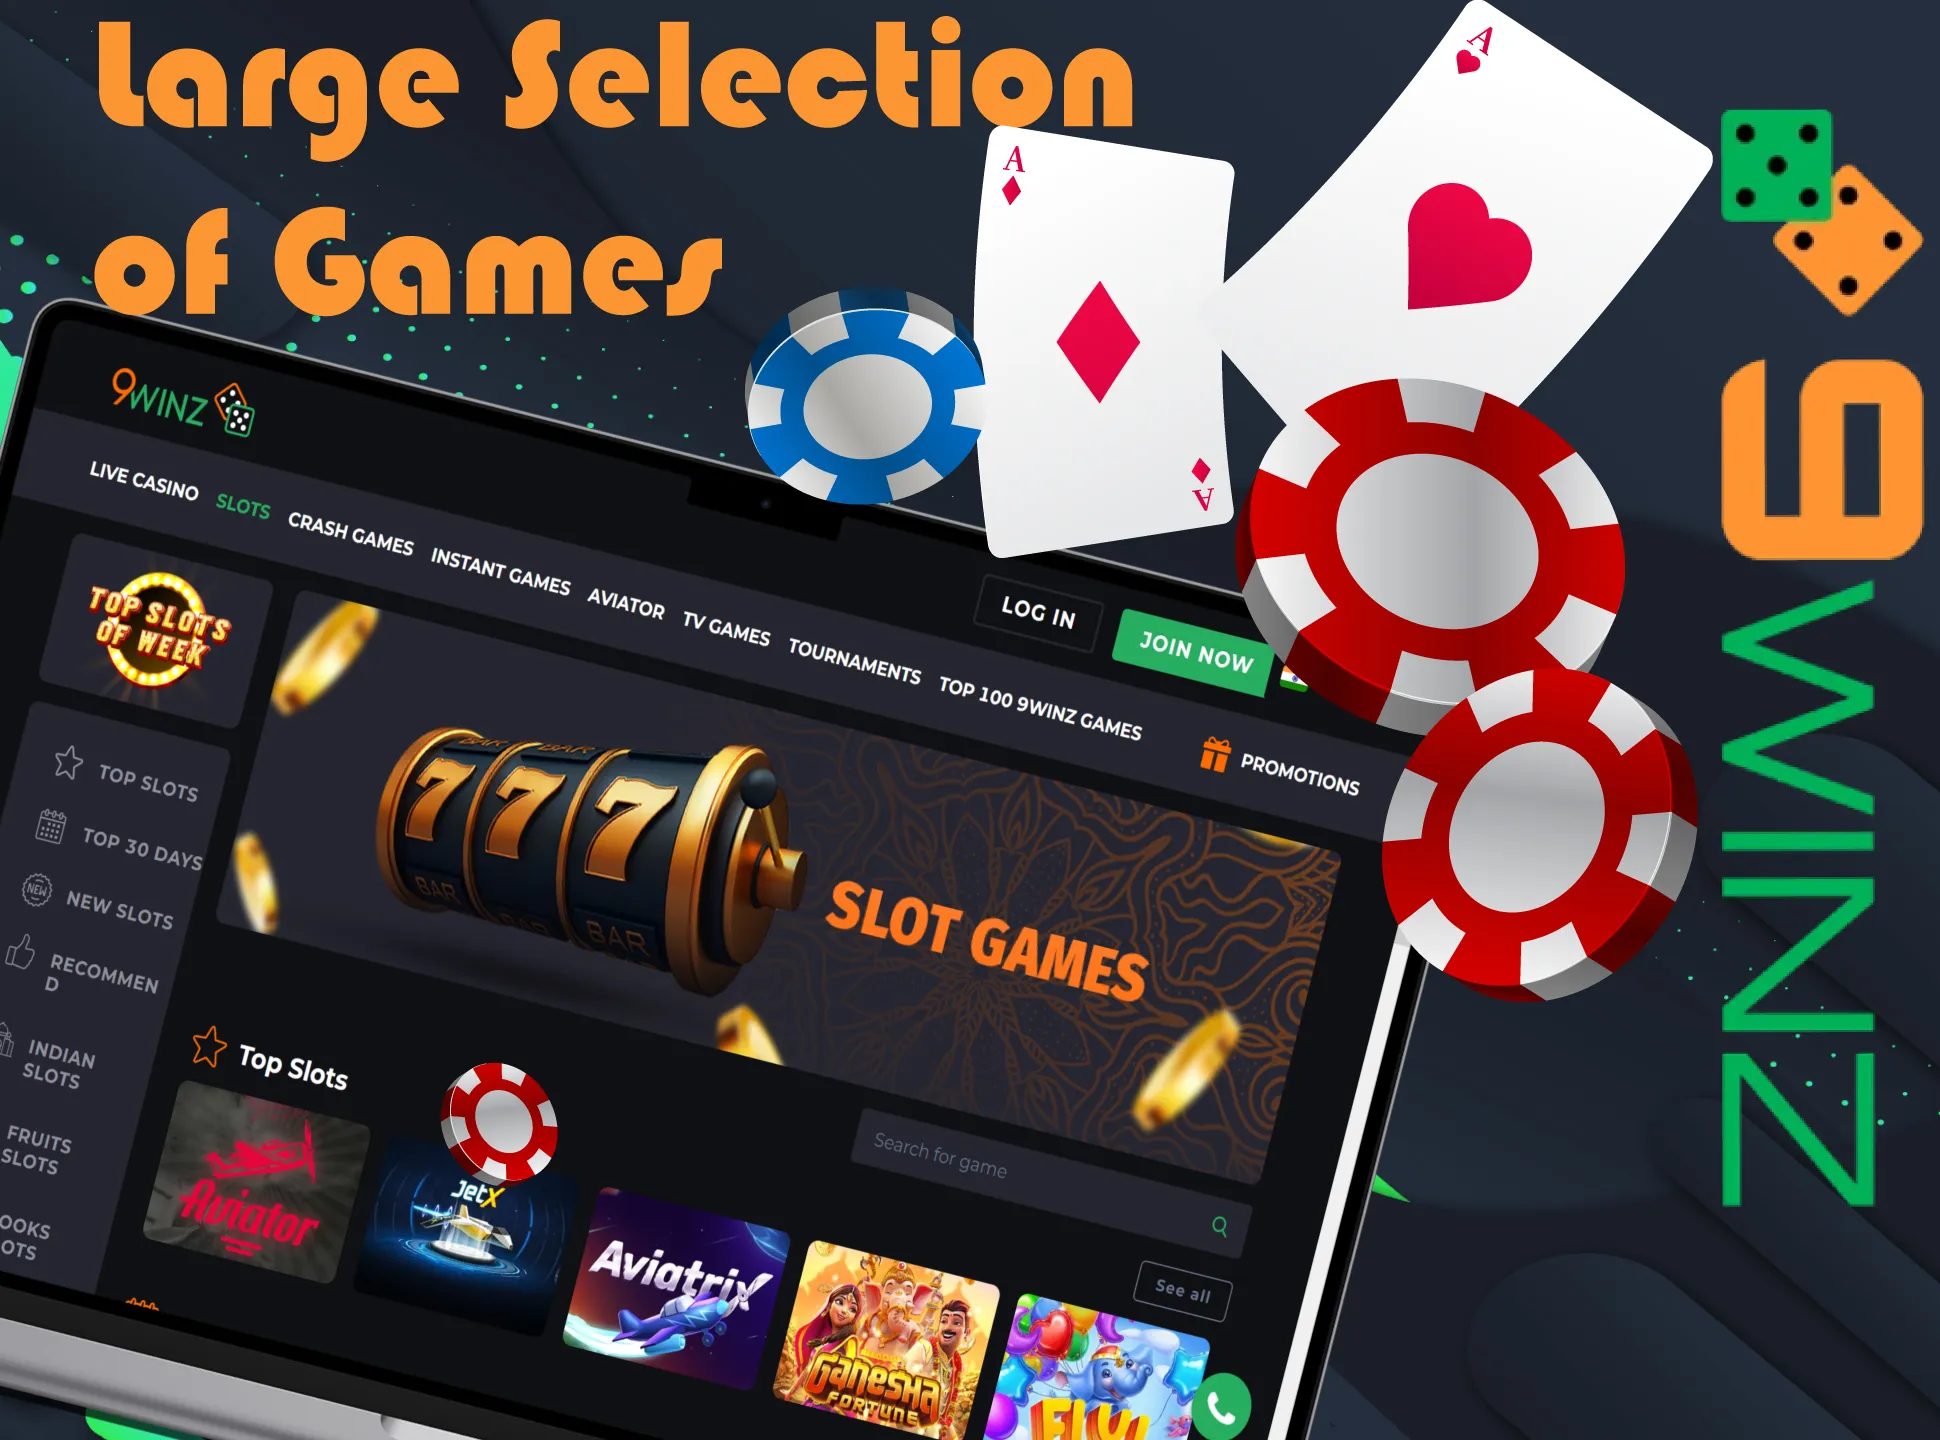 Search for your favourite games in 9winz casino.